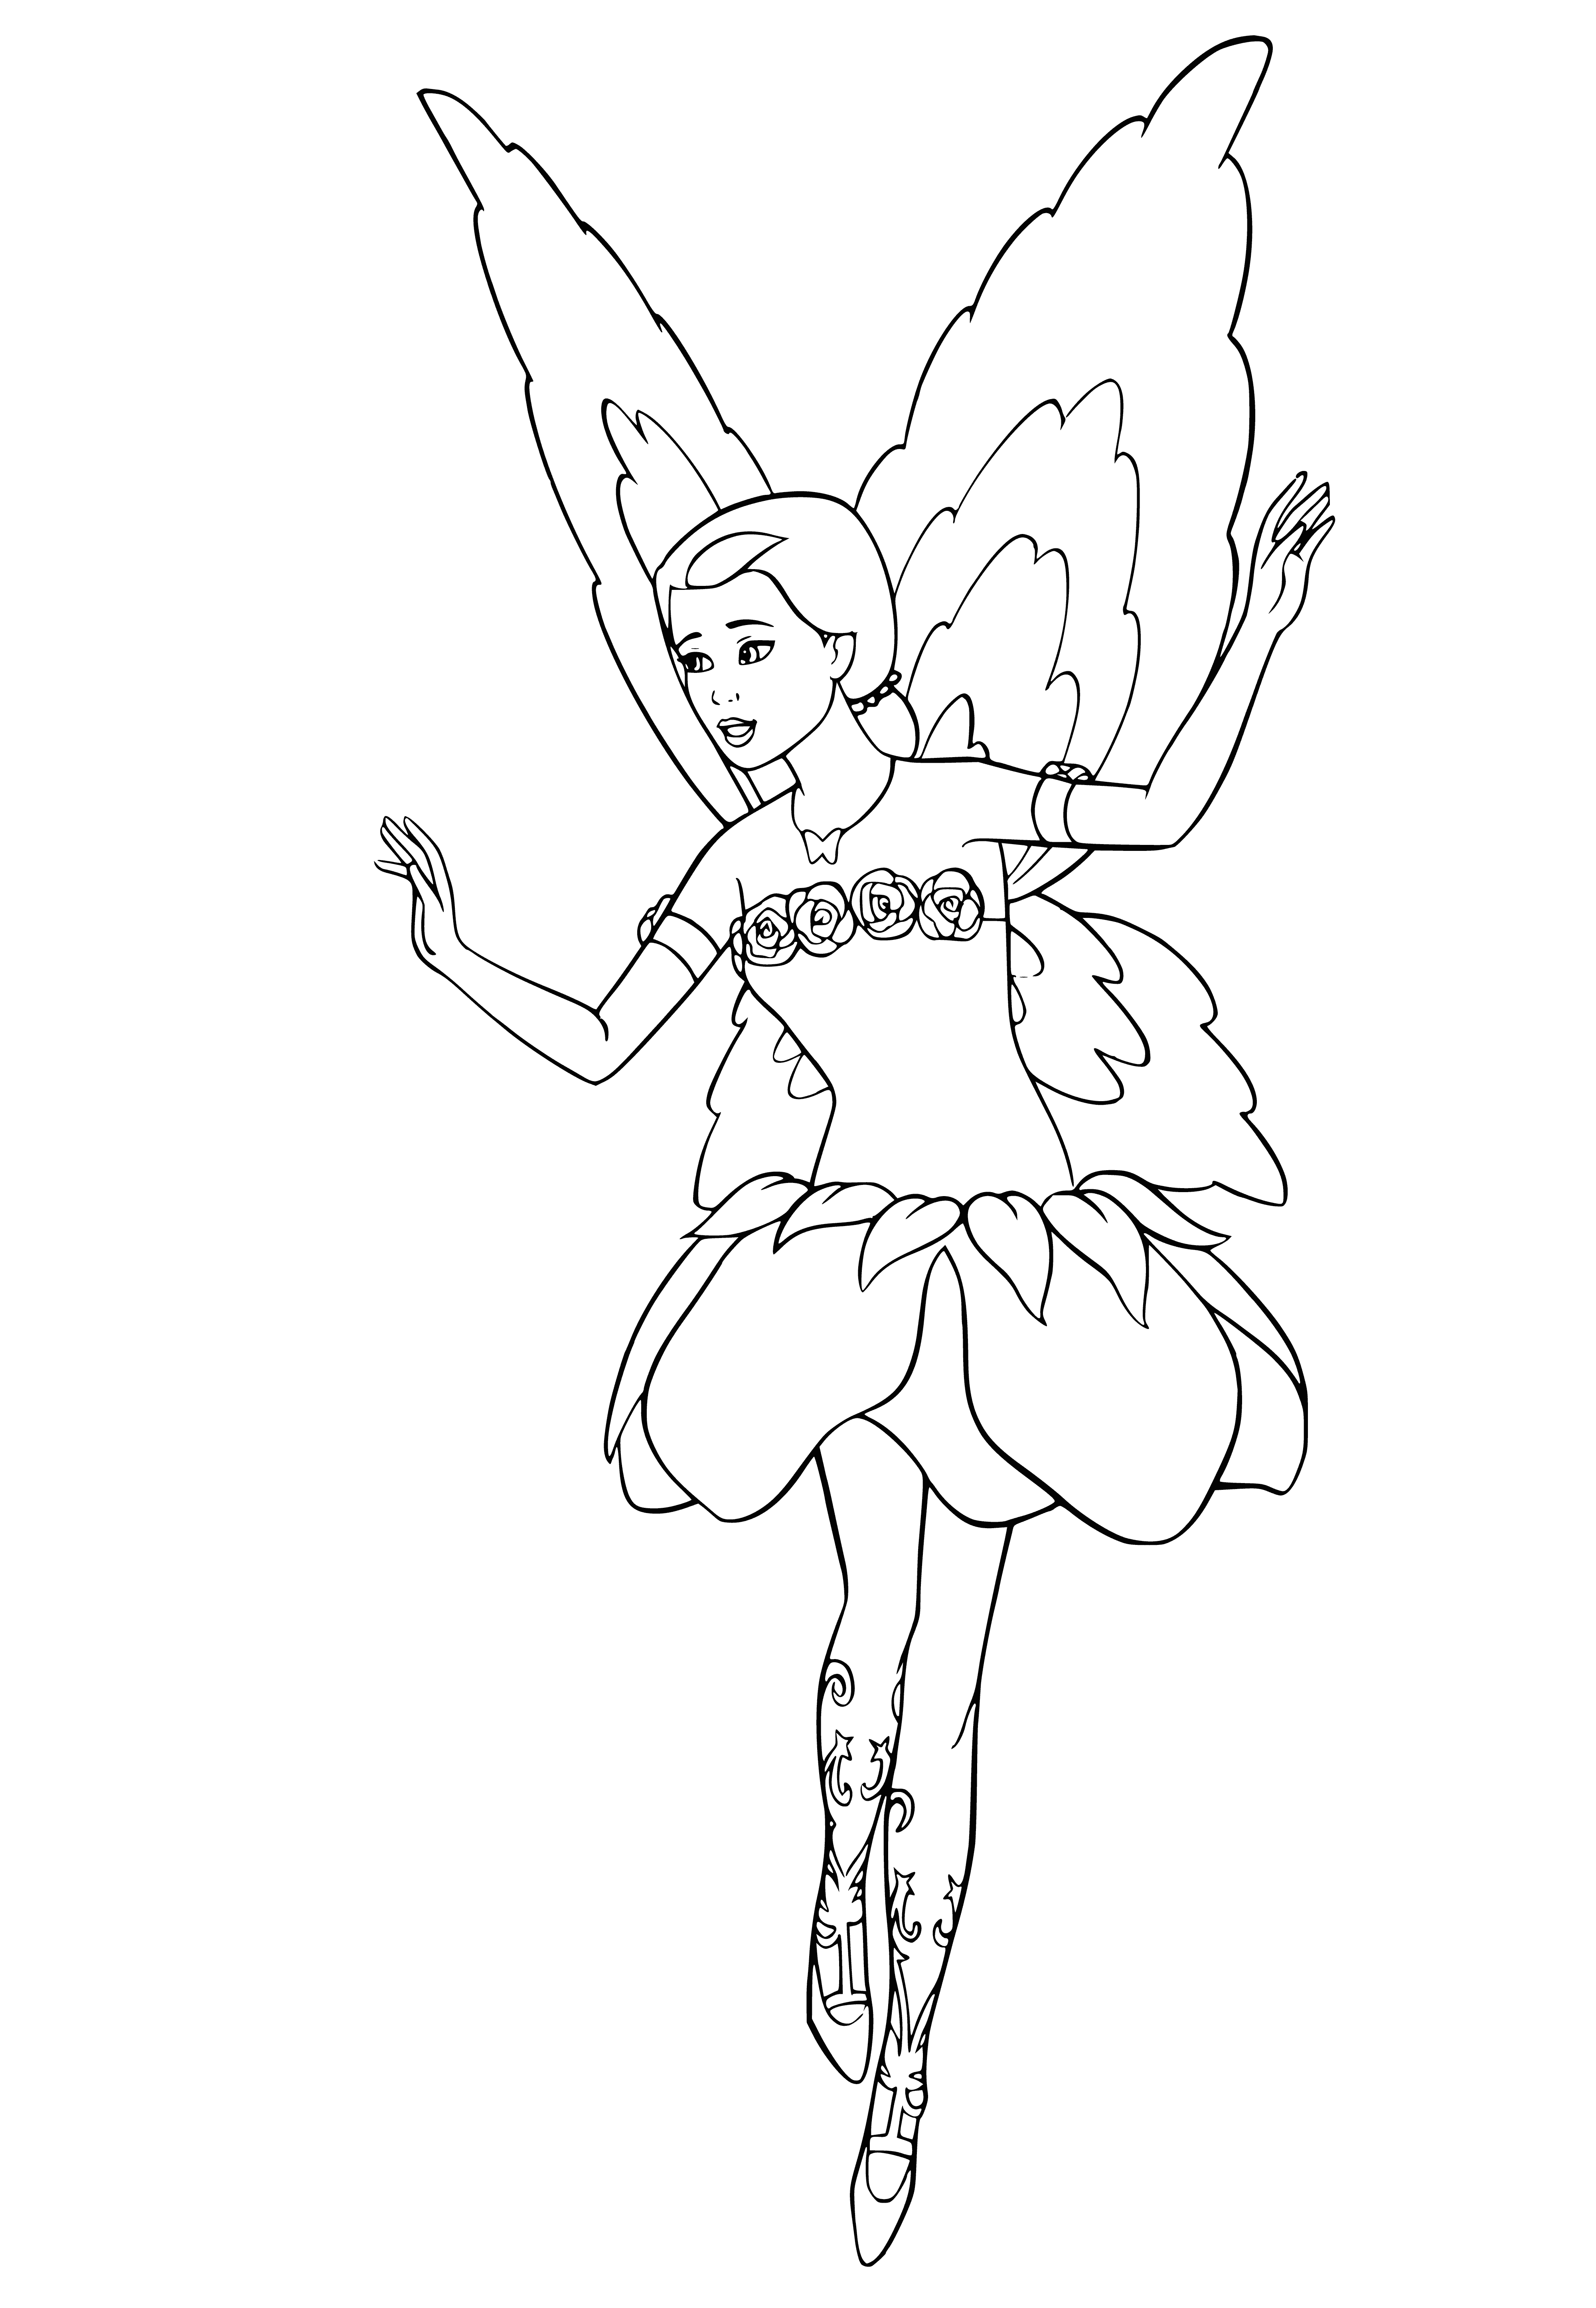 Barbie with wings coloring page